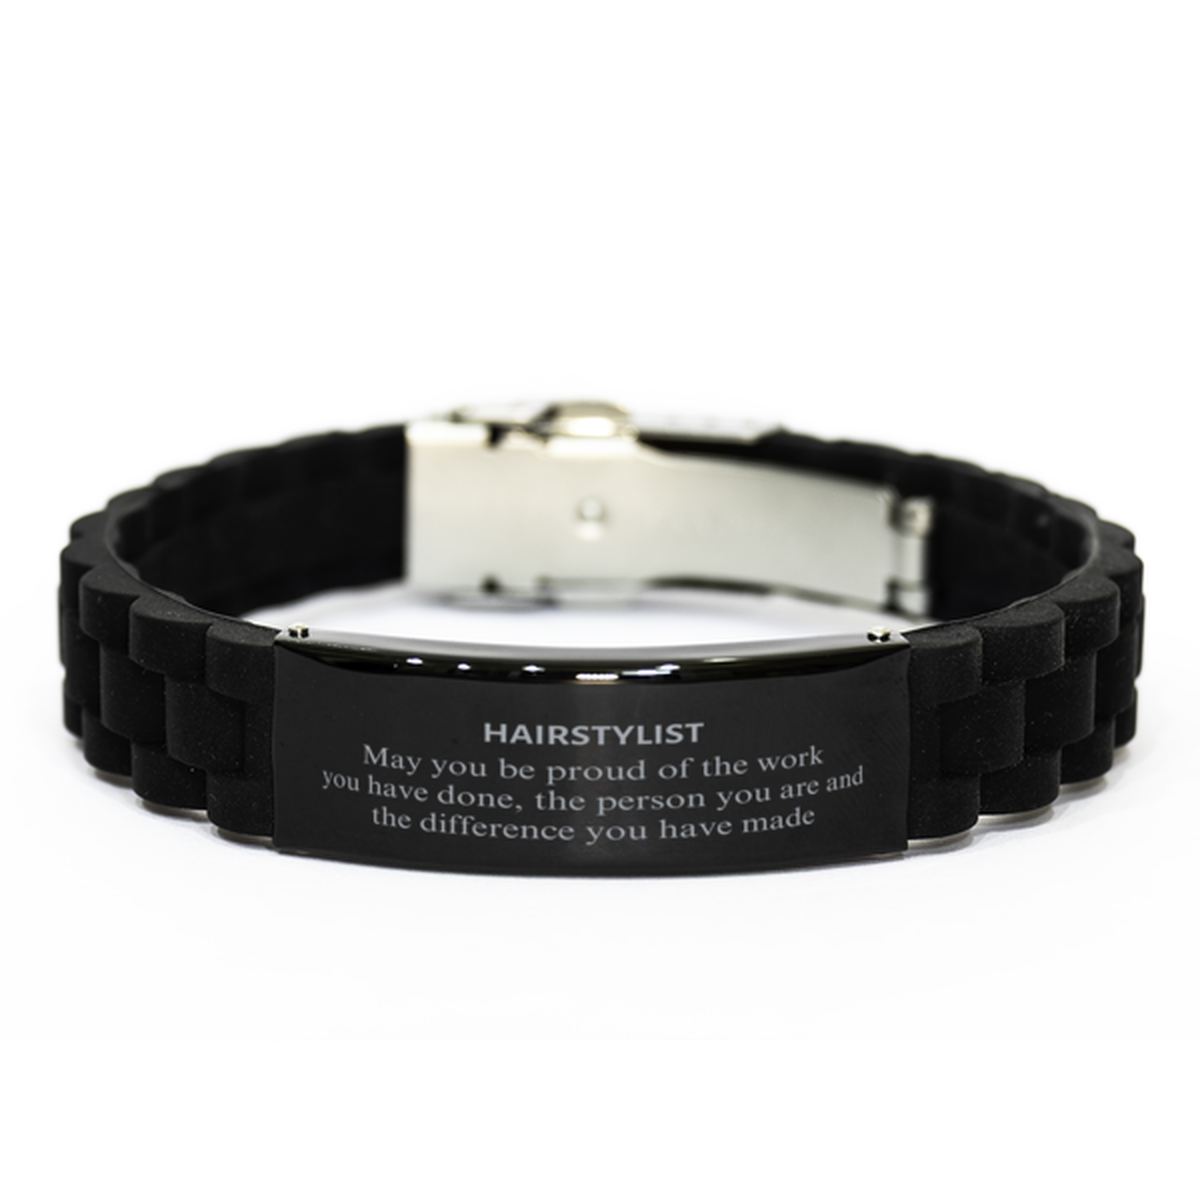 Hairstylist May you be proud of the work you have done, Retirement Hairstylist Black Glidelock Clasp Bracelet for Colleague Appreciation Gifts Amazing for Hairstylist